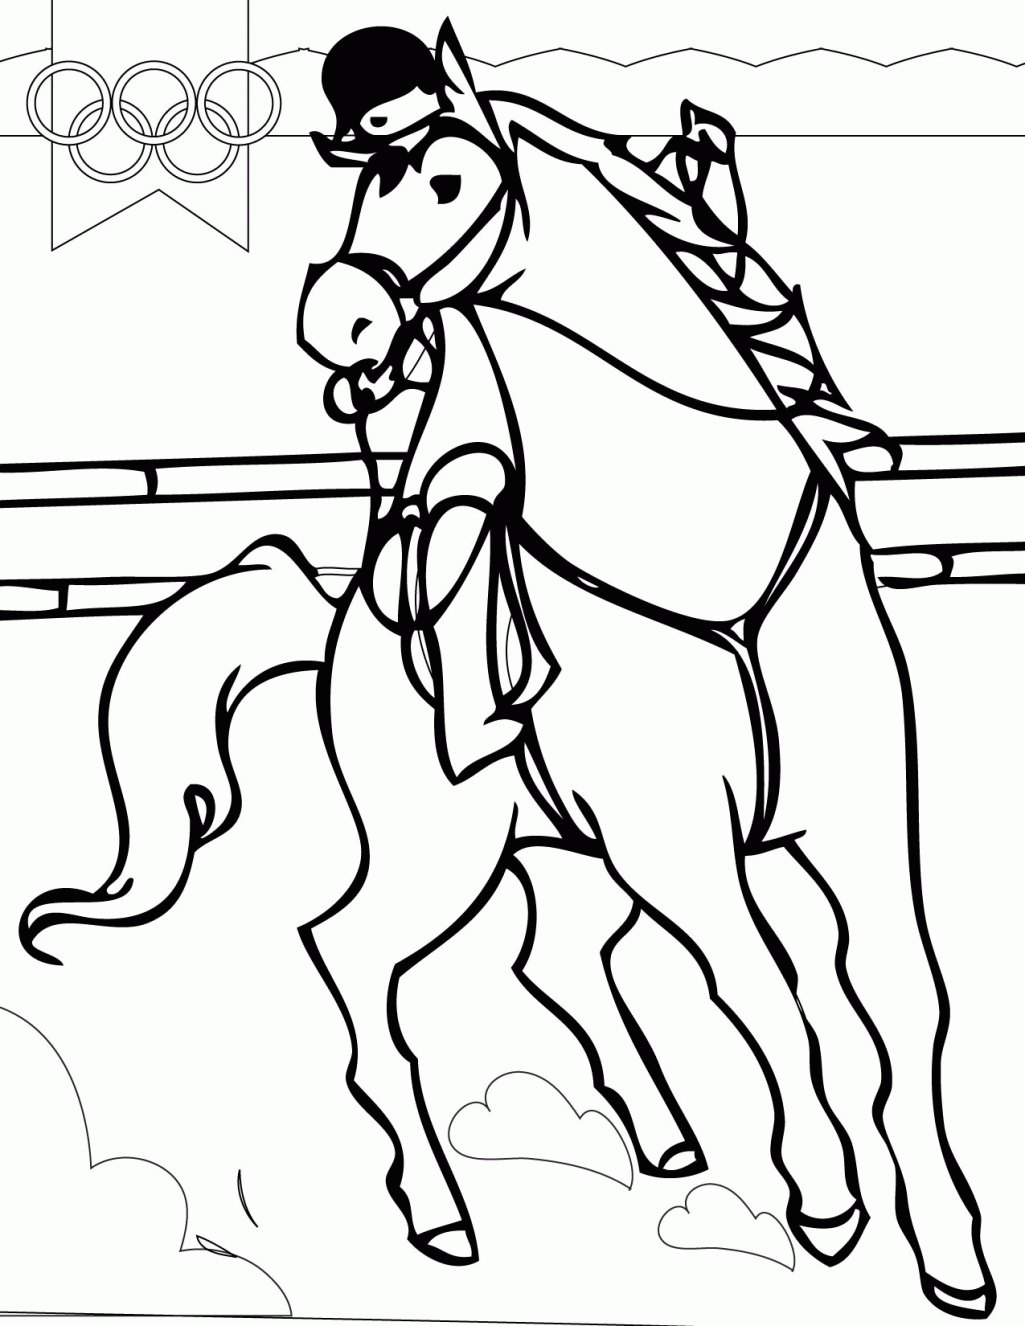 Olympic Sports Coloring Pages - Coloring Page